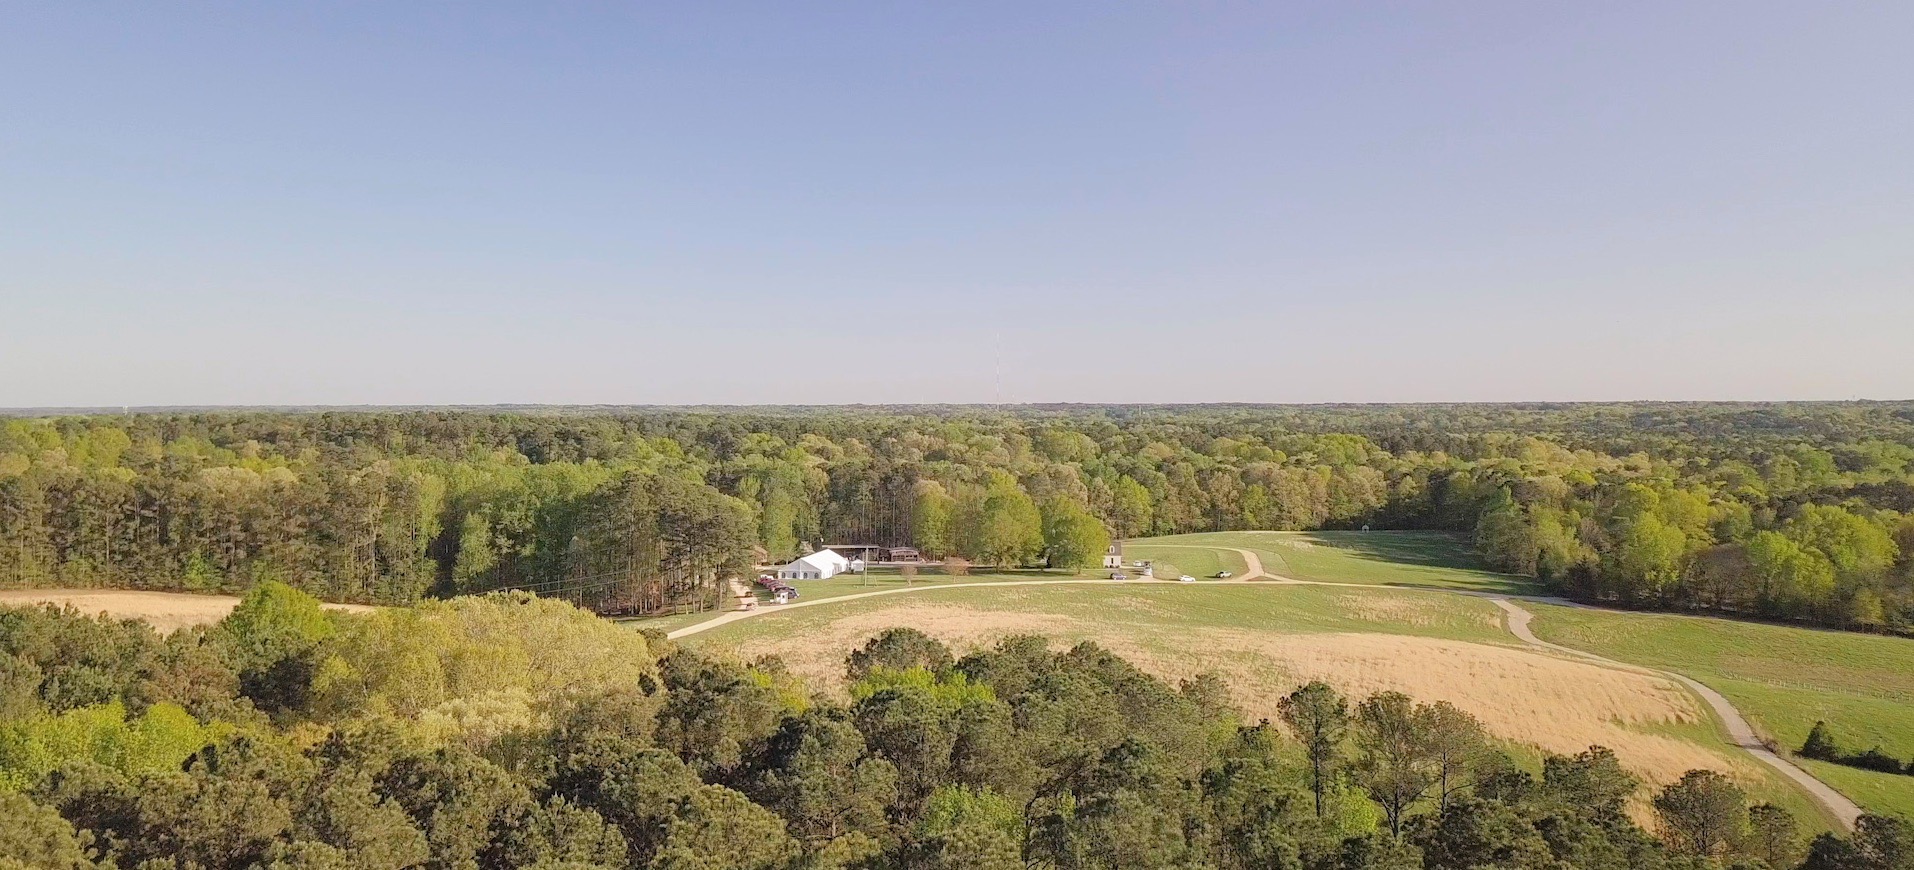 Drone Shot of The Meadows Raleigh